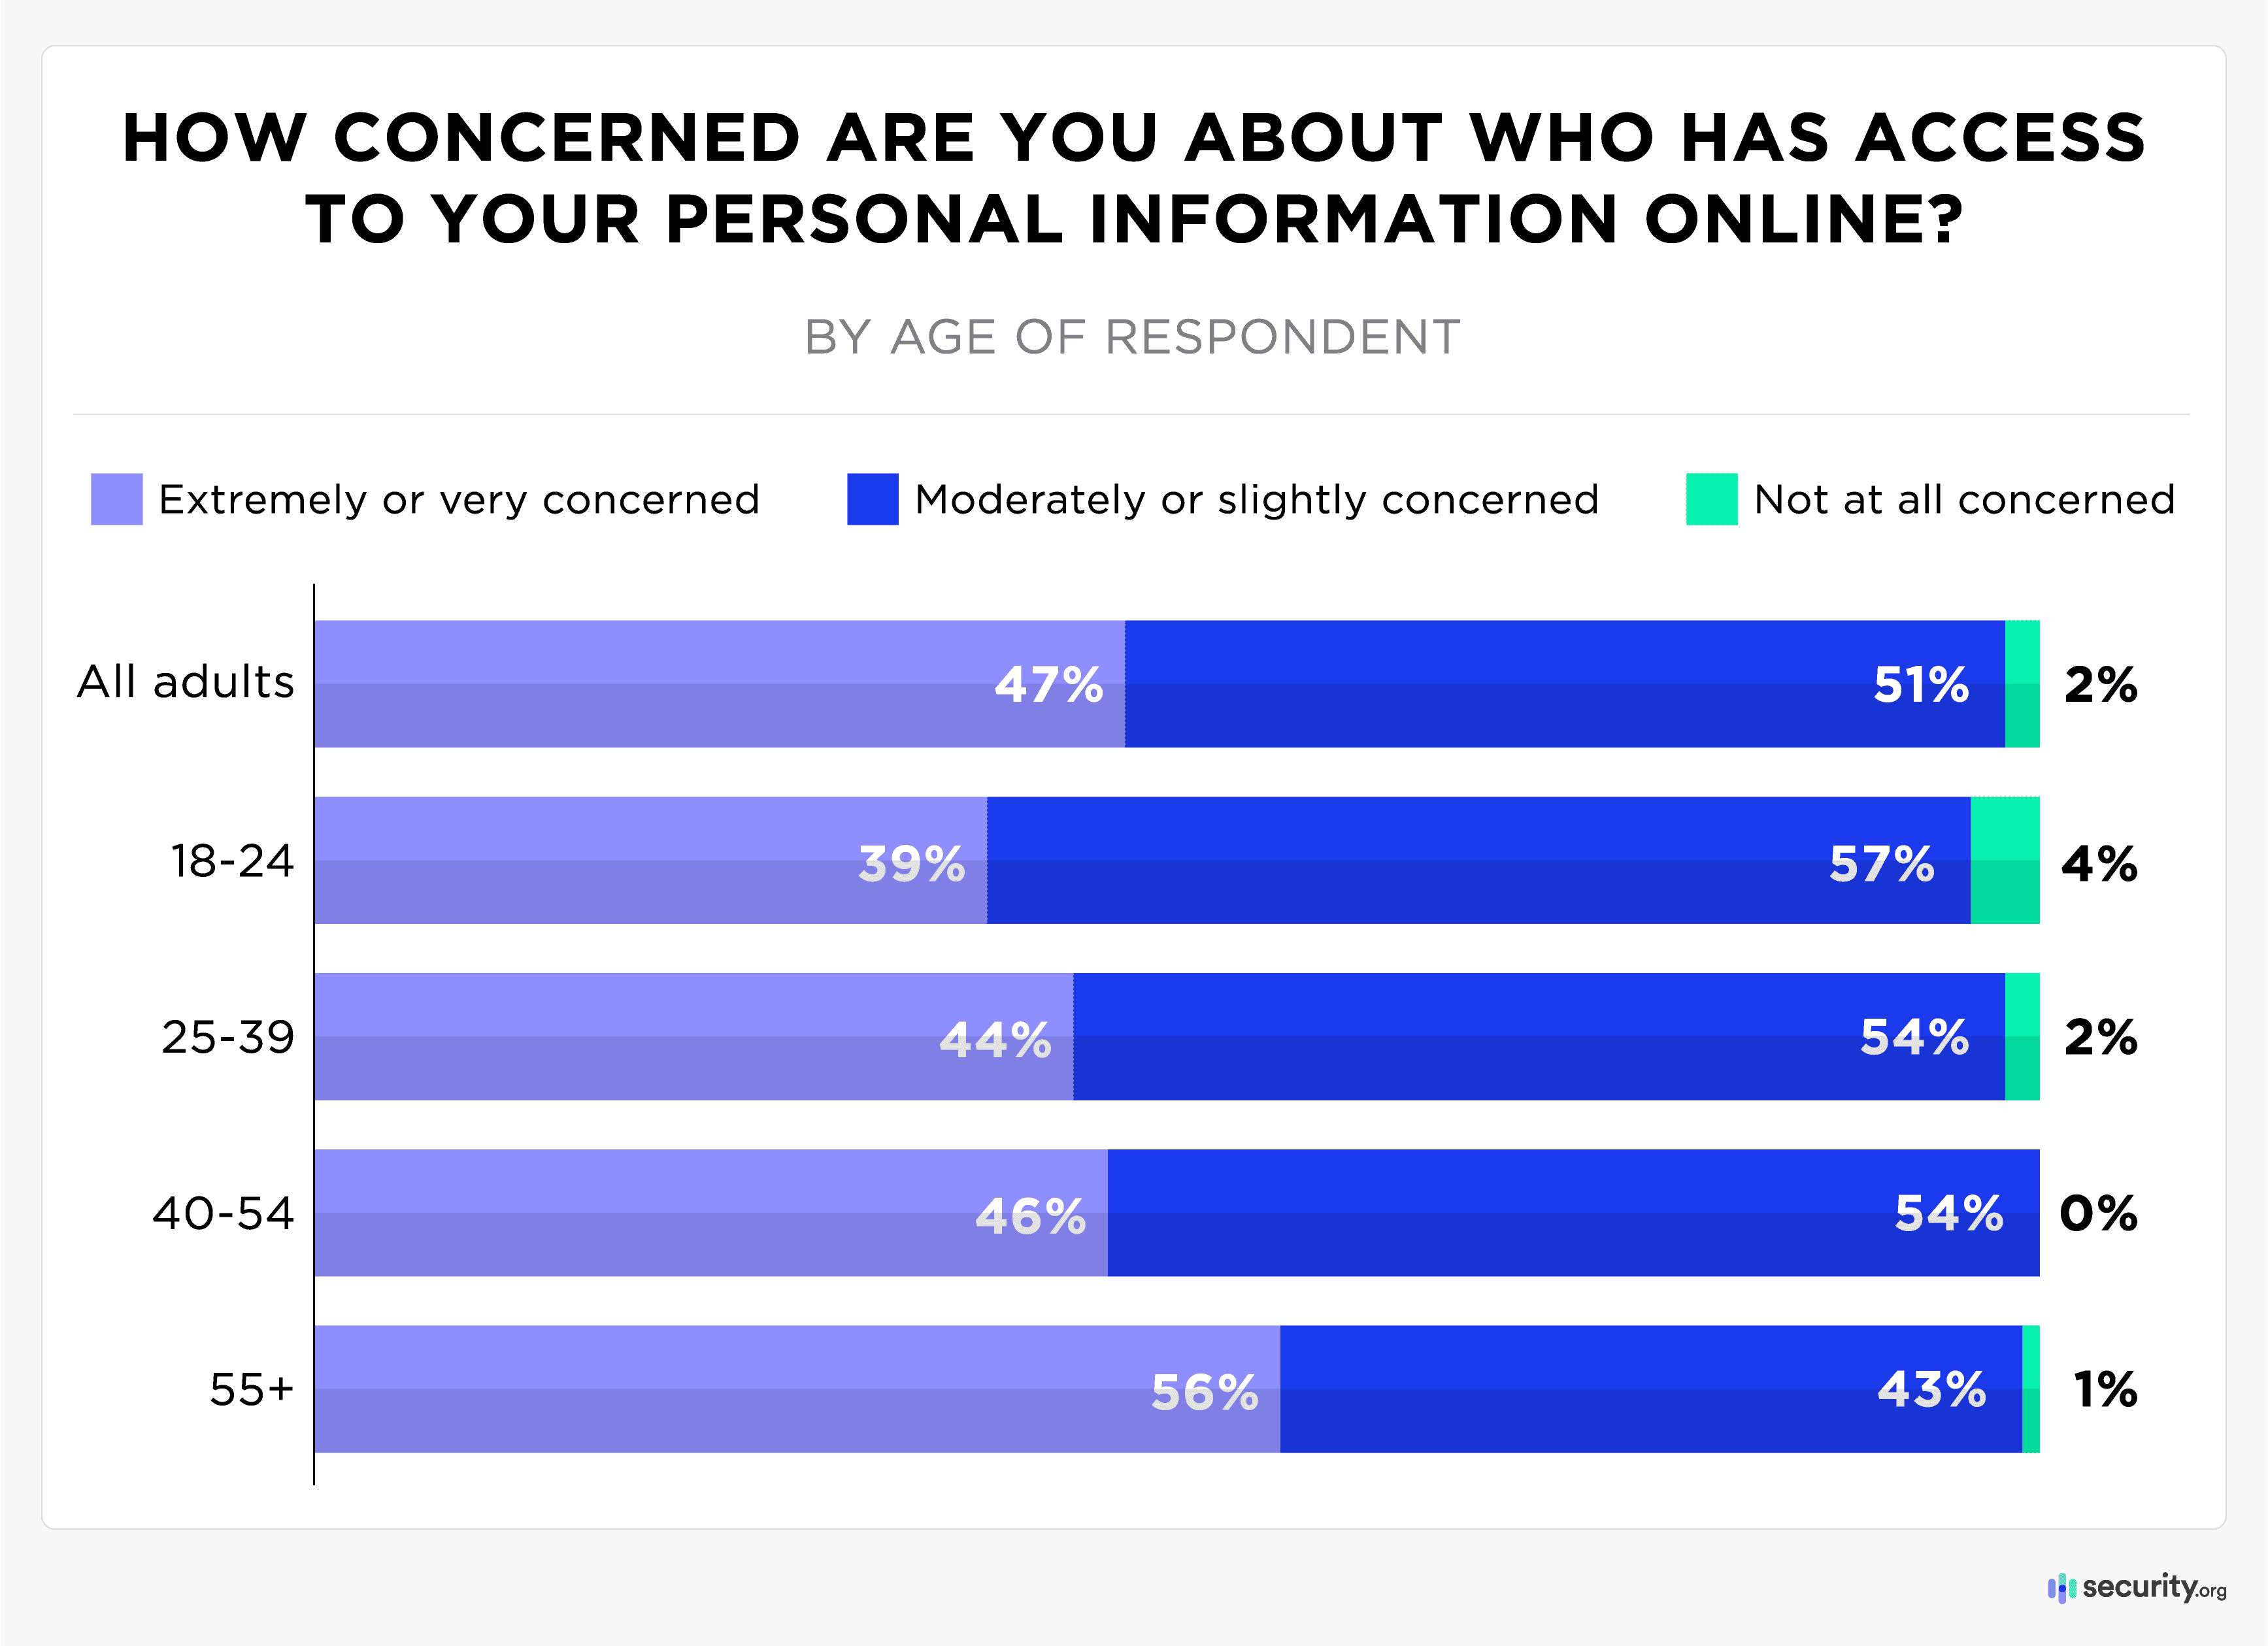 How Concerned Are You About Who Has Access to Personal Information